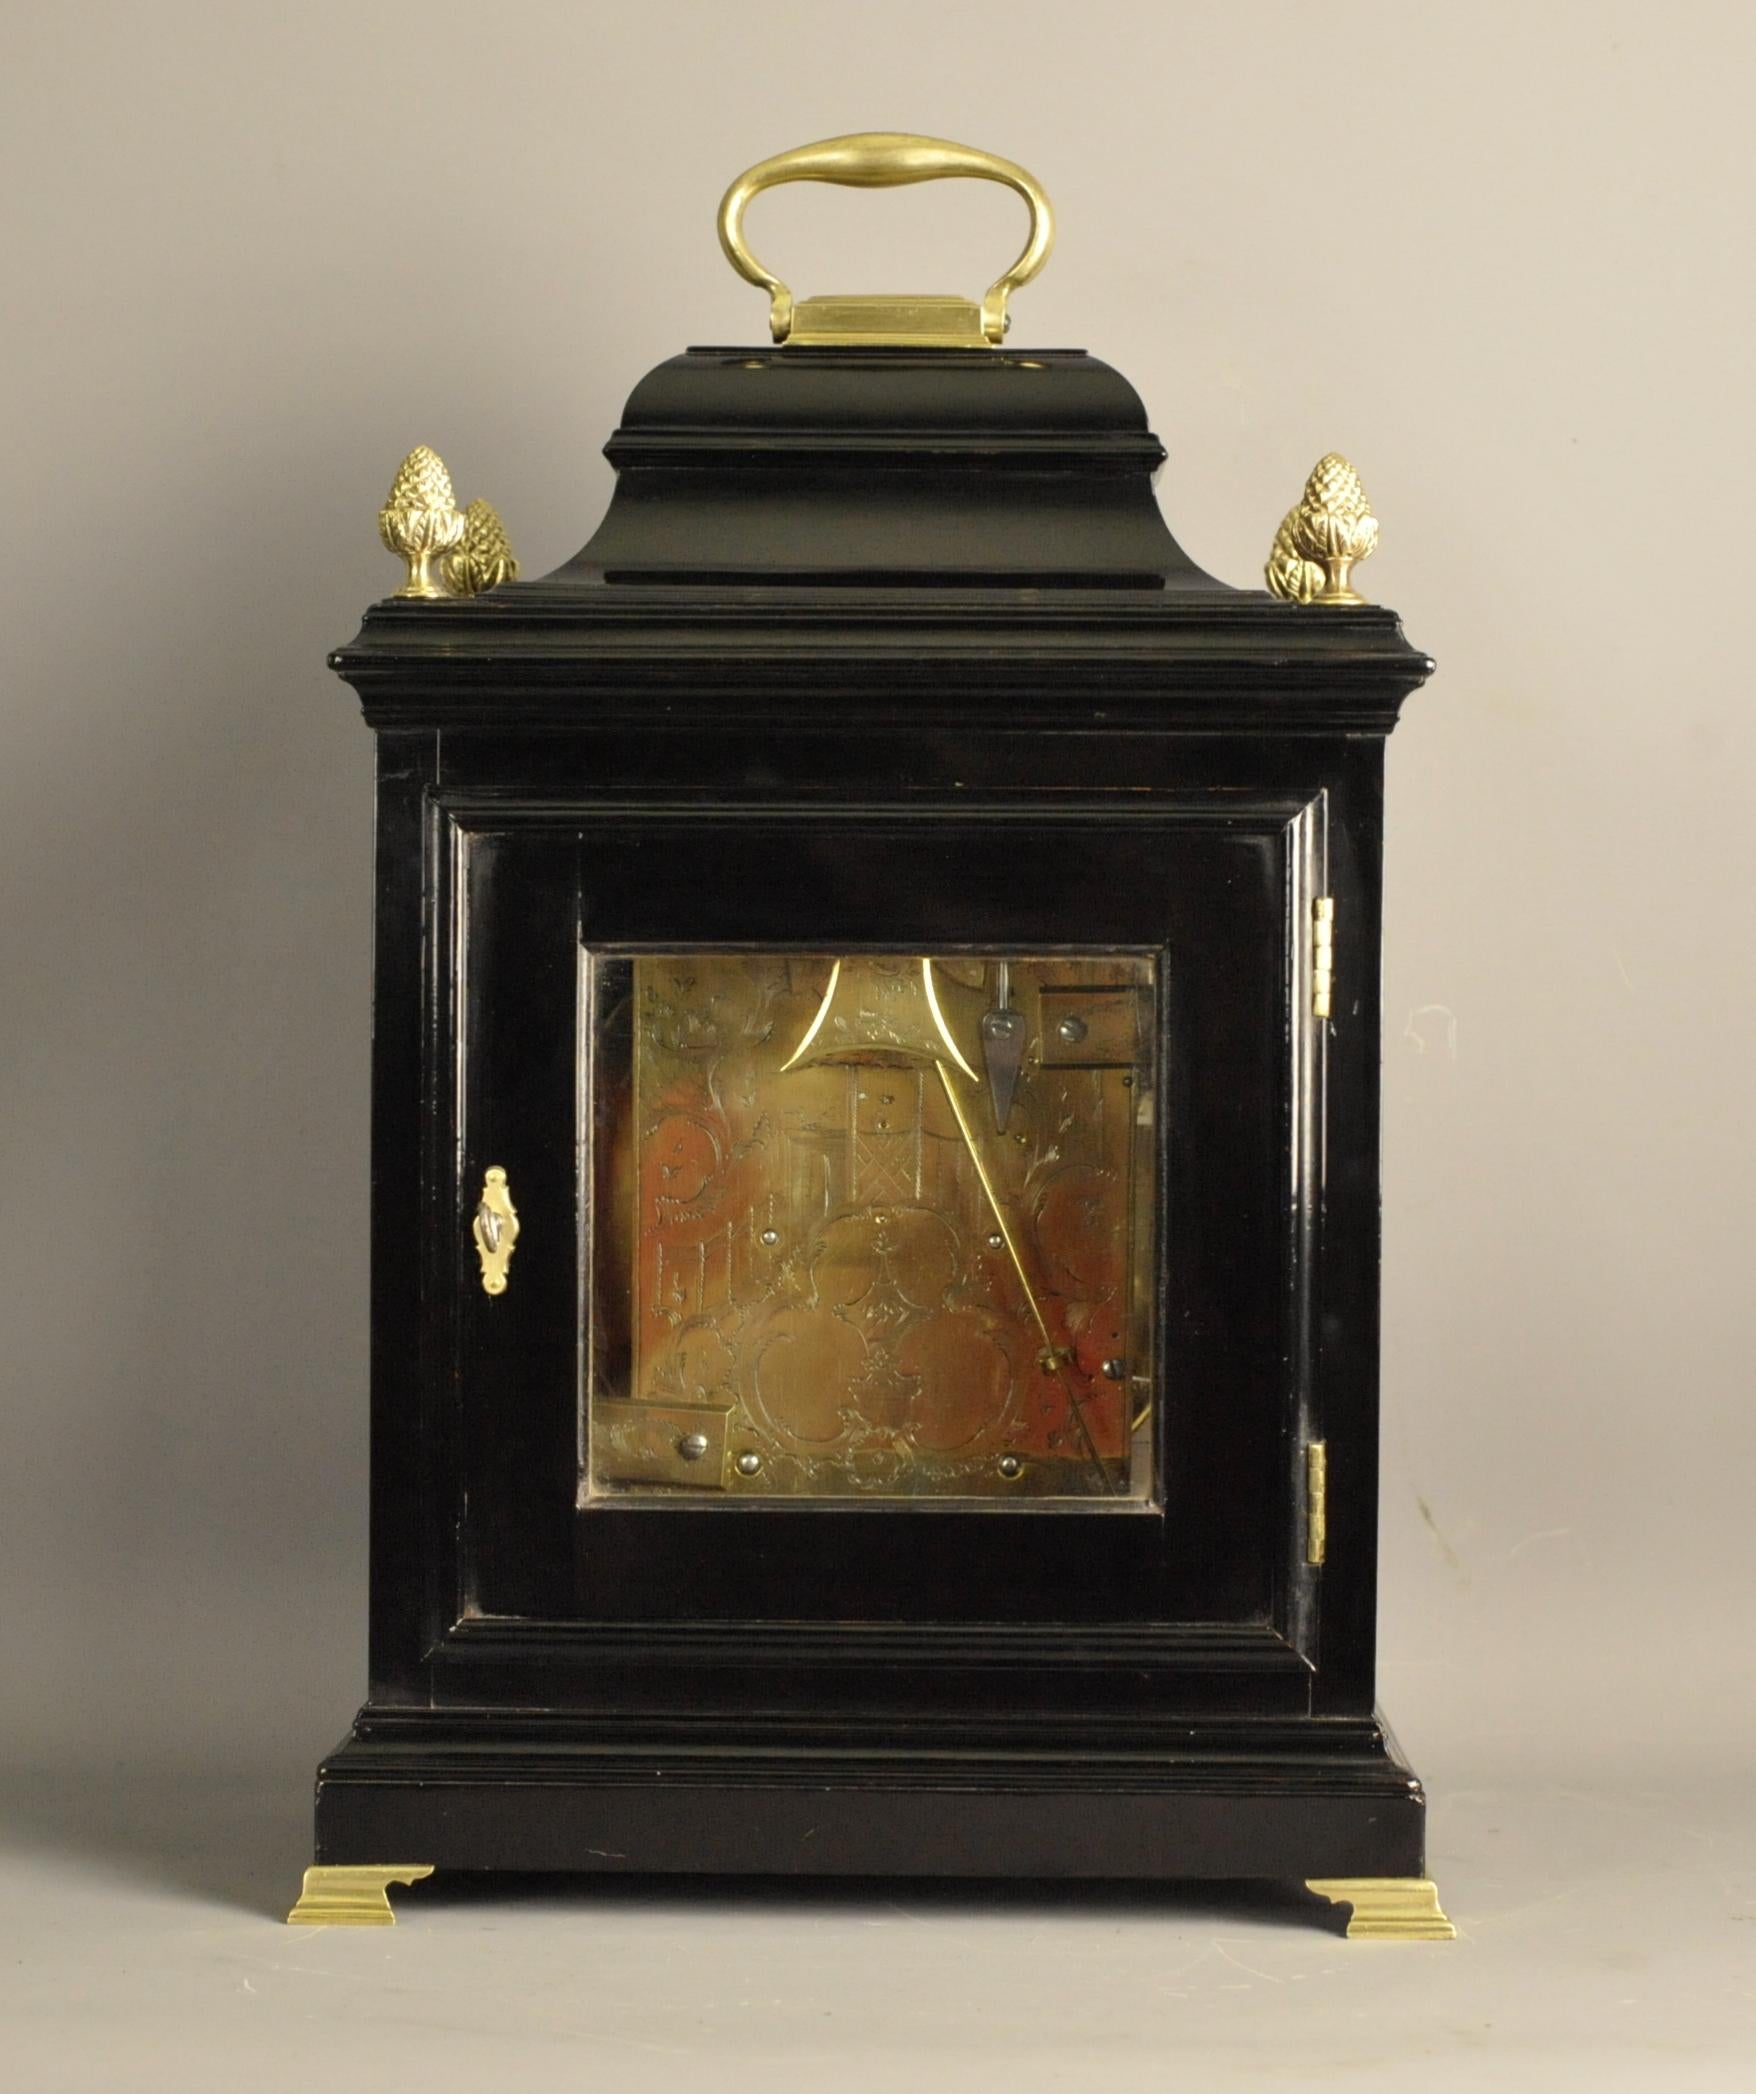 Verge Bracket Clock Enamel Dial, Martin, London In Good Condition For Sale In Chesterfield, GB